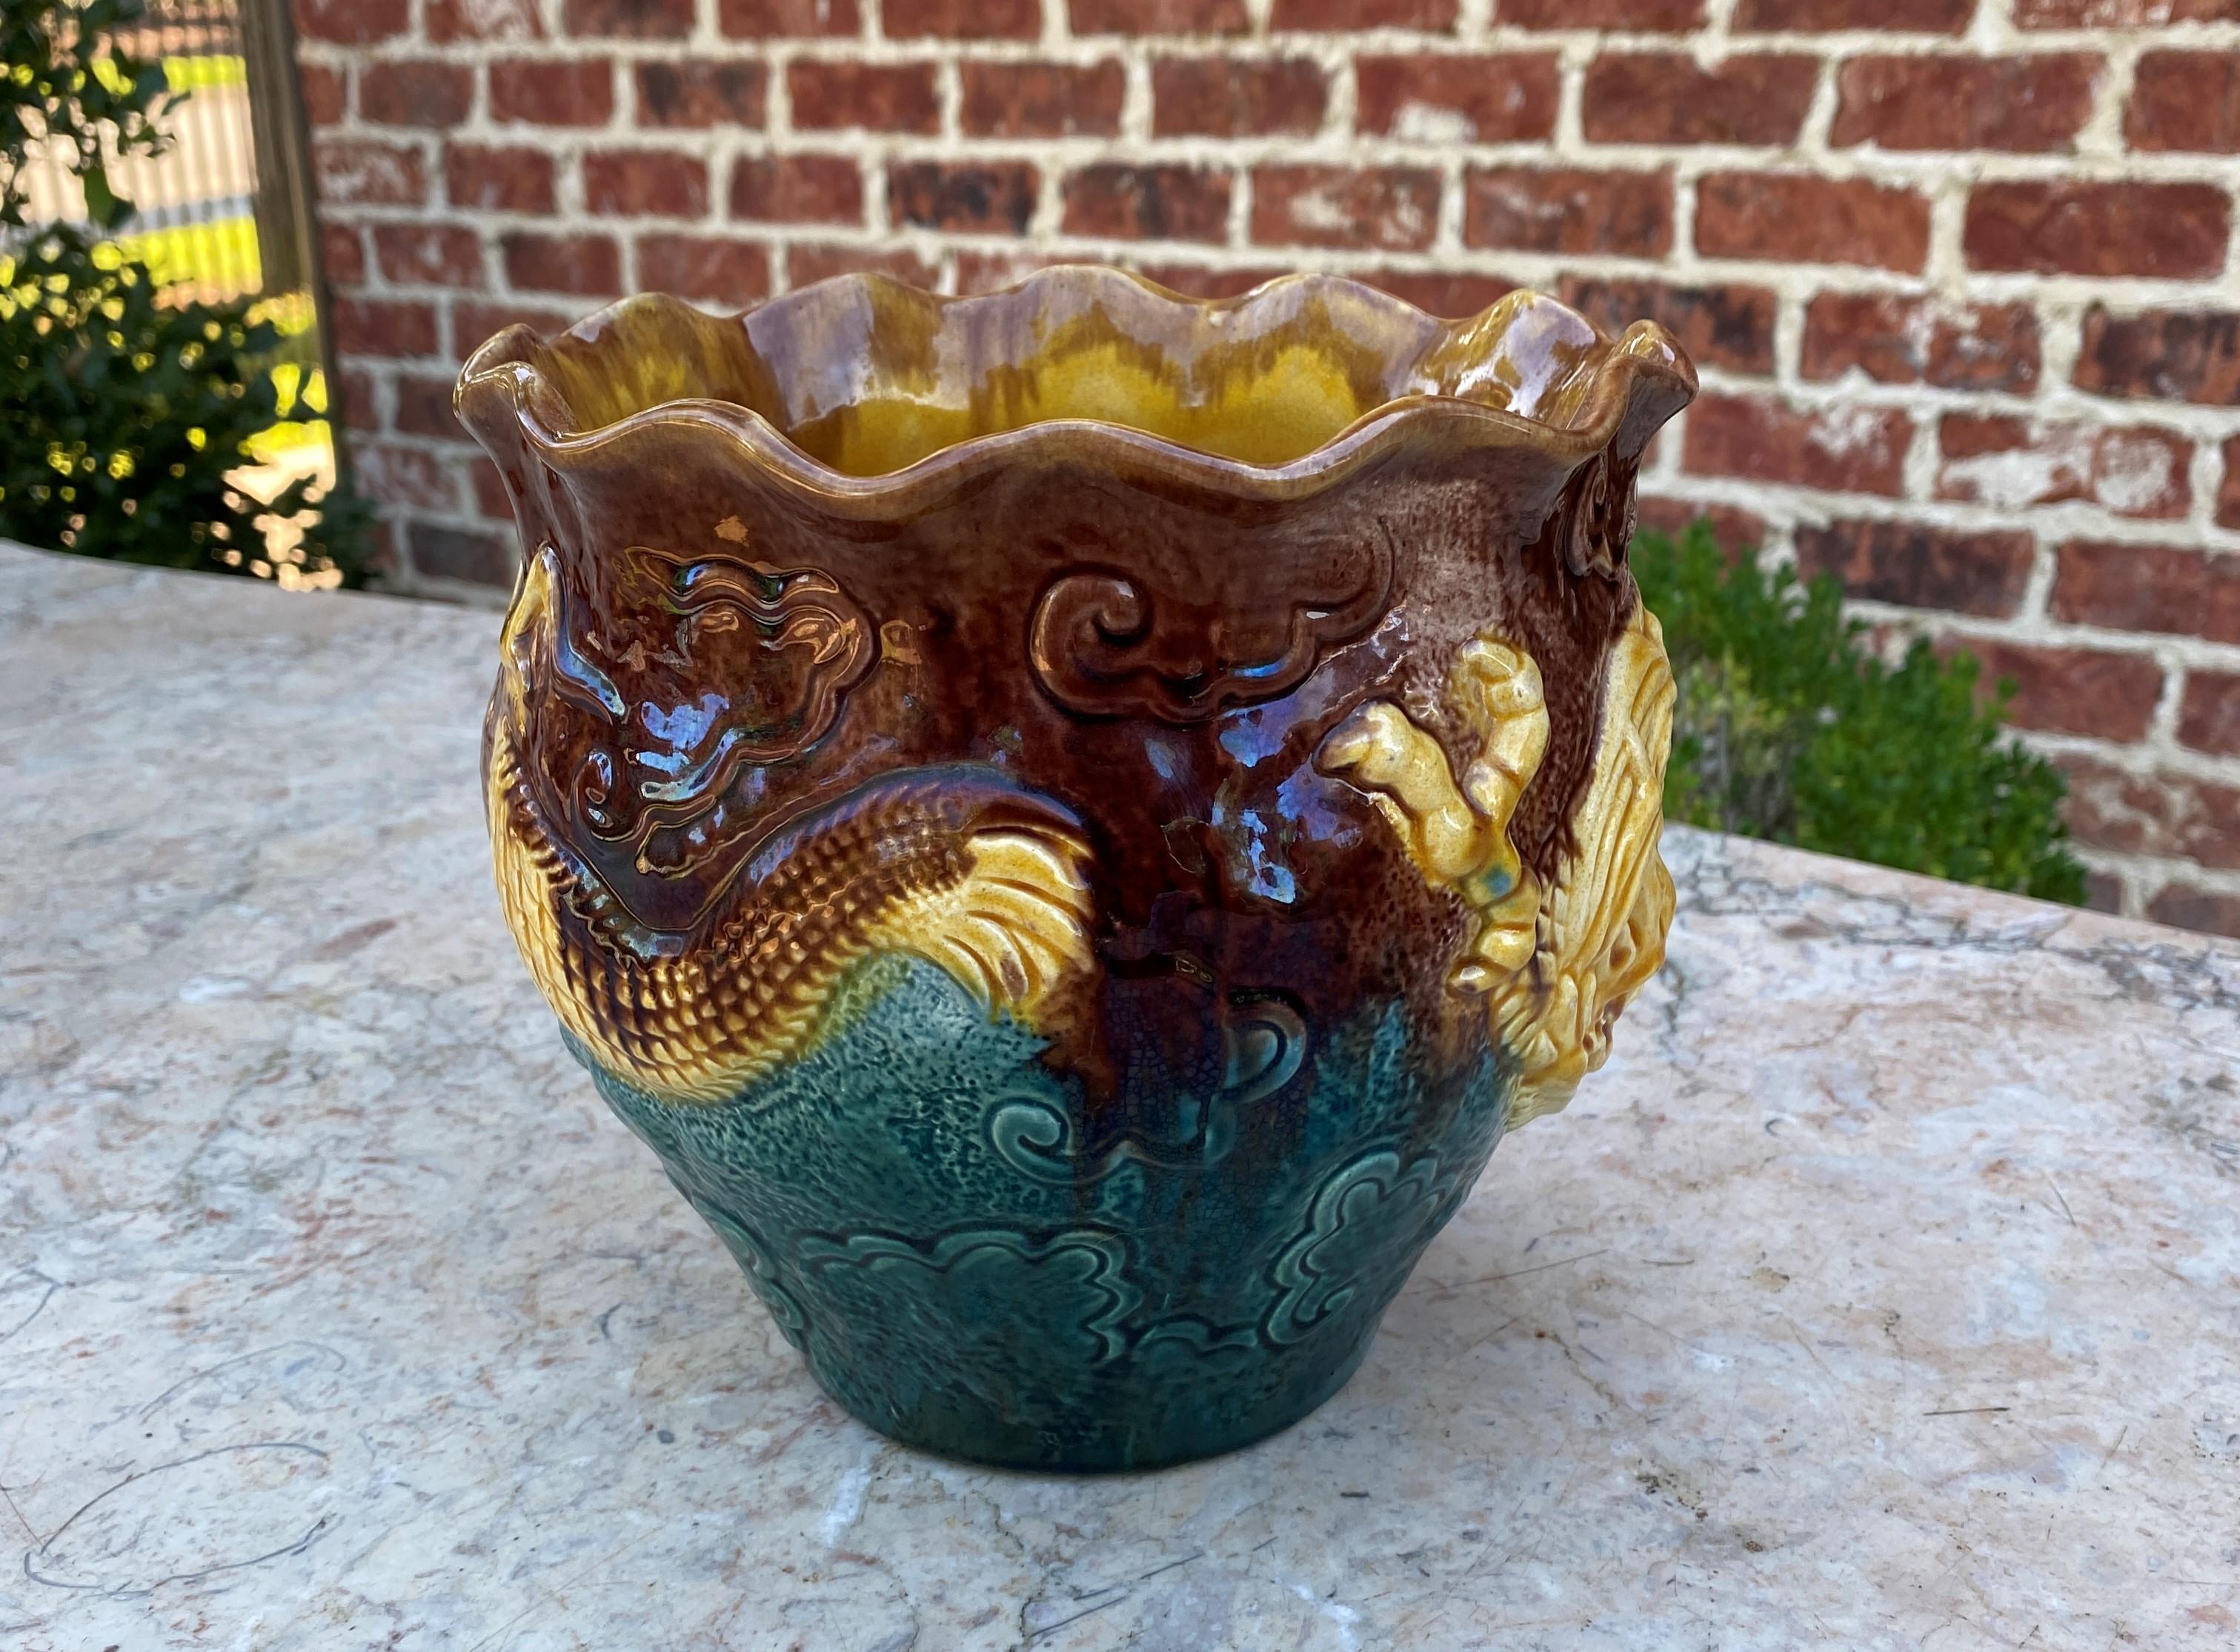 Pottery Antique French Majolica Planter Cache Pot Jardiniere Brown Green Gold Dragons